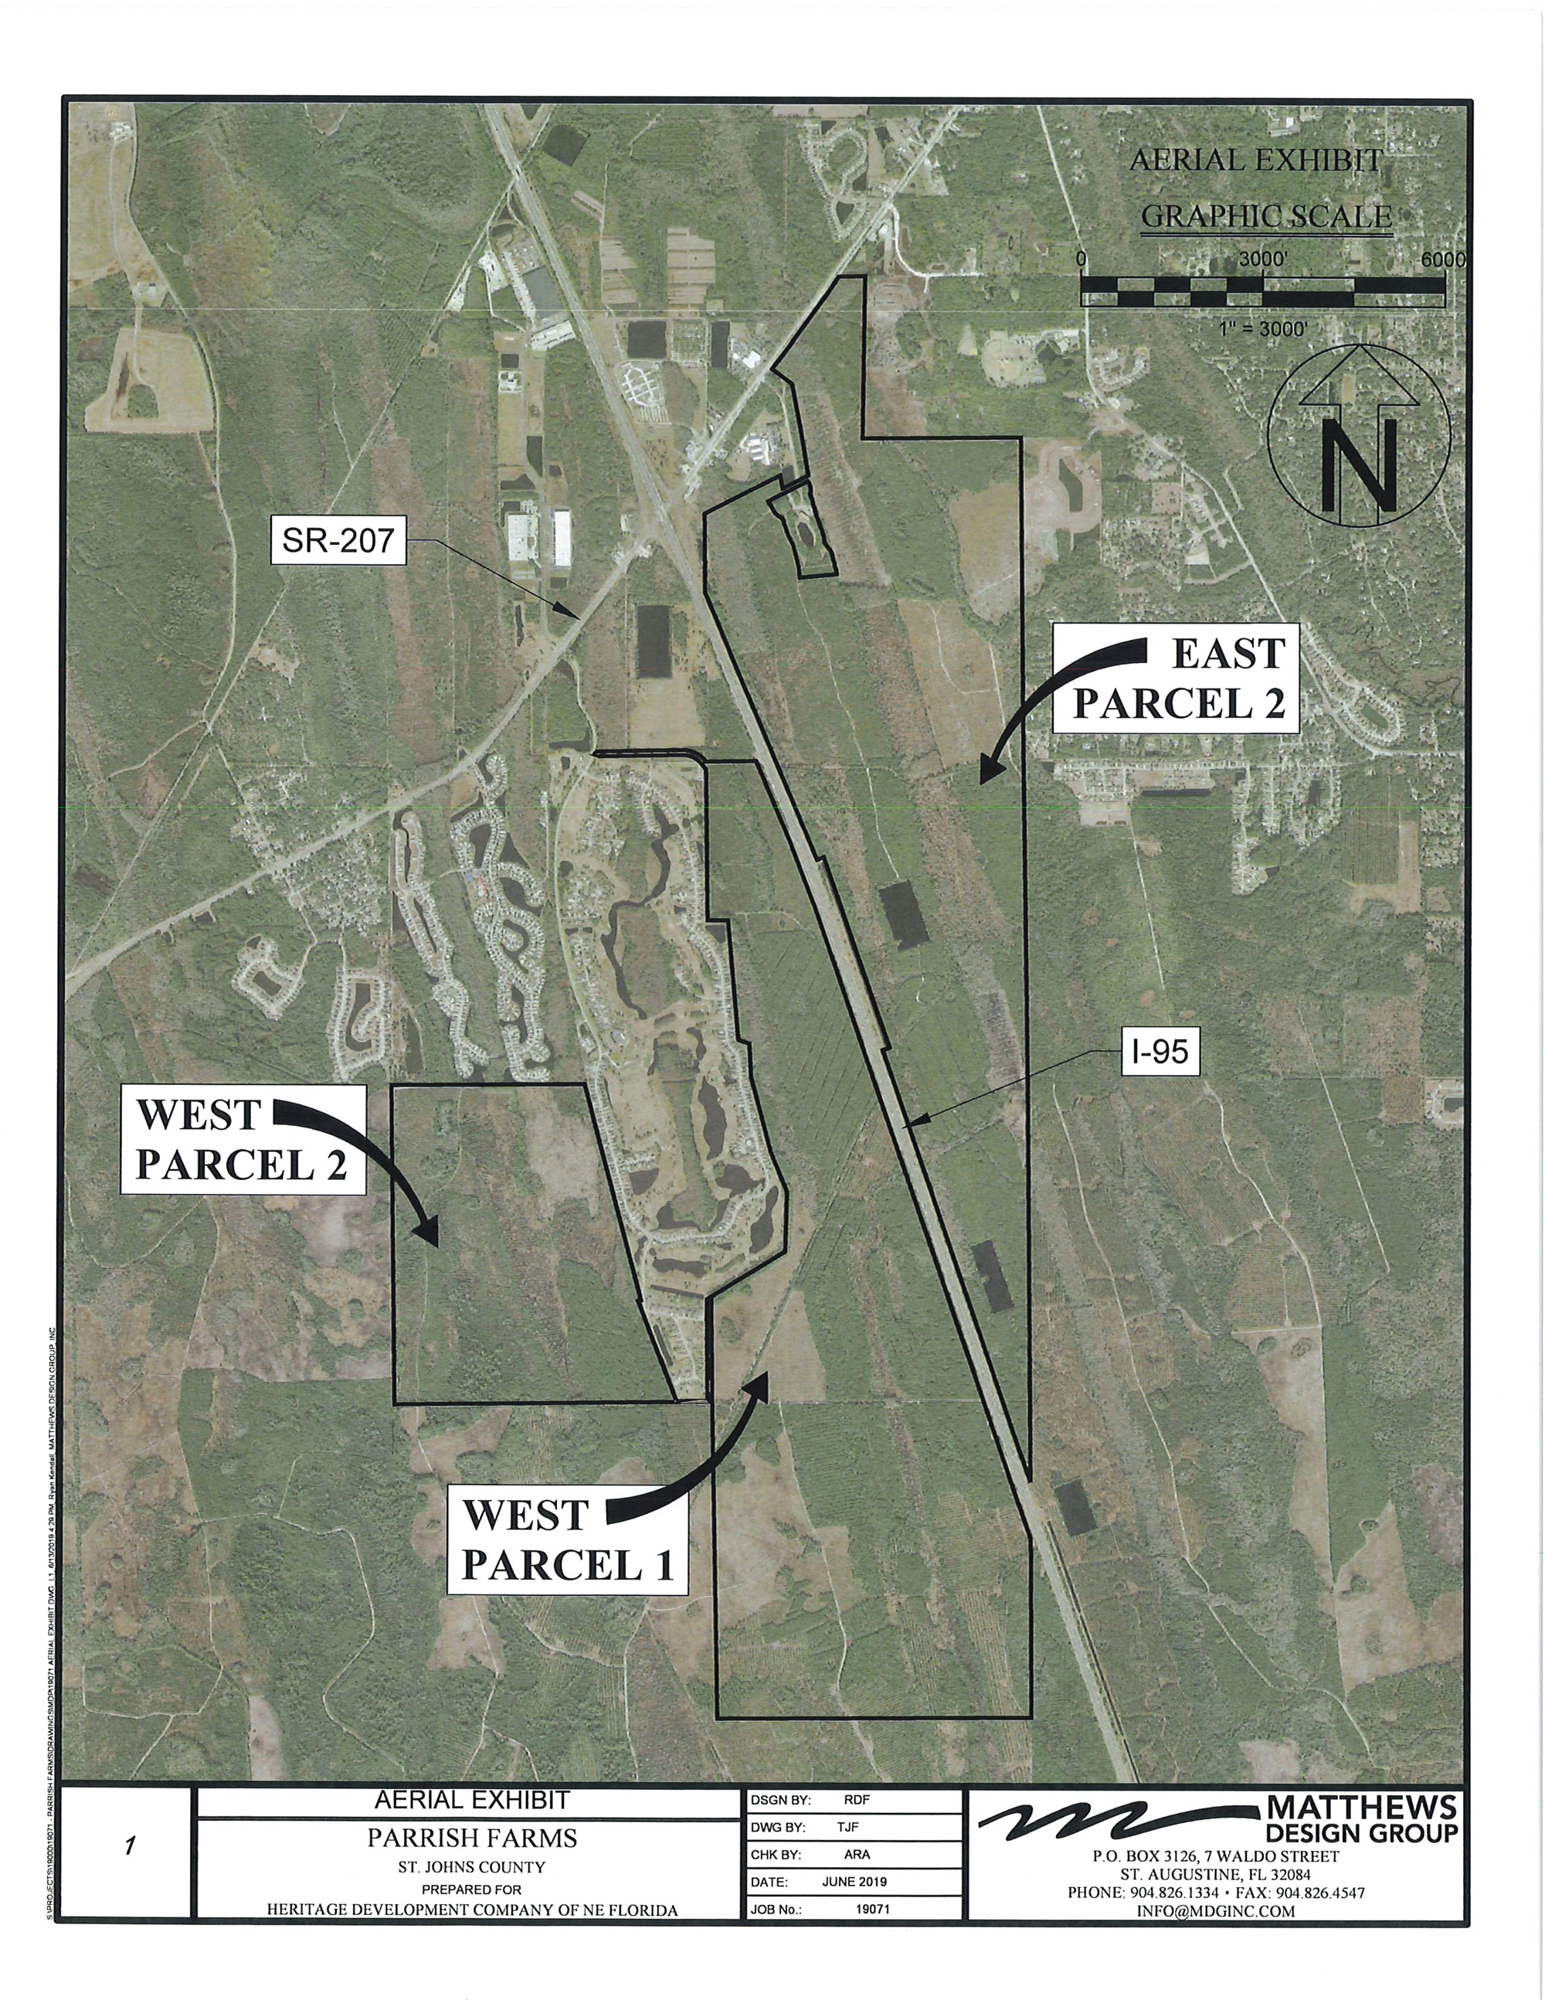 An aerial view of the proposed Parrish Farms development.